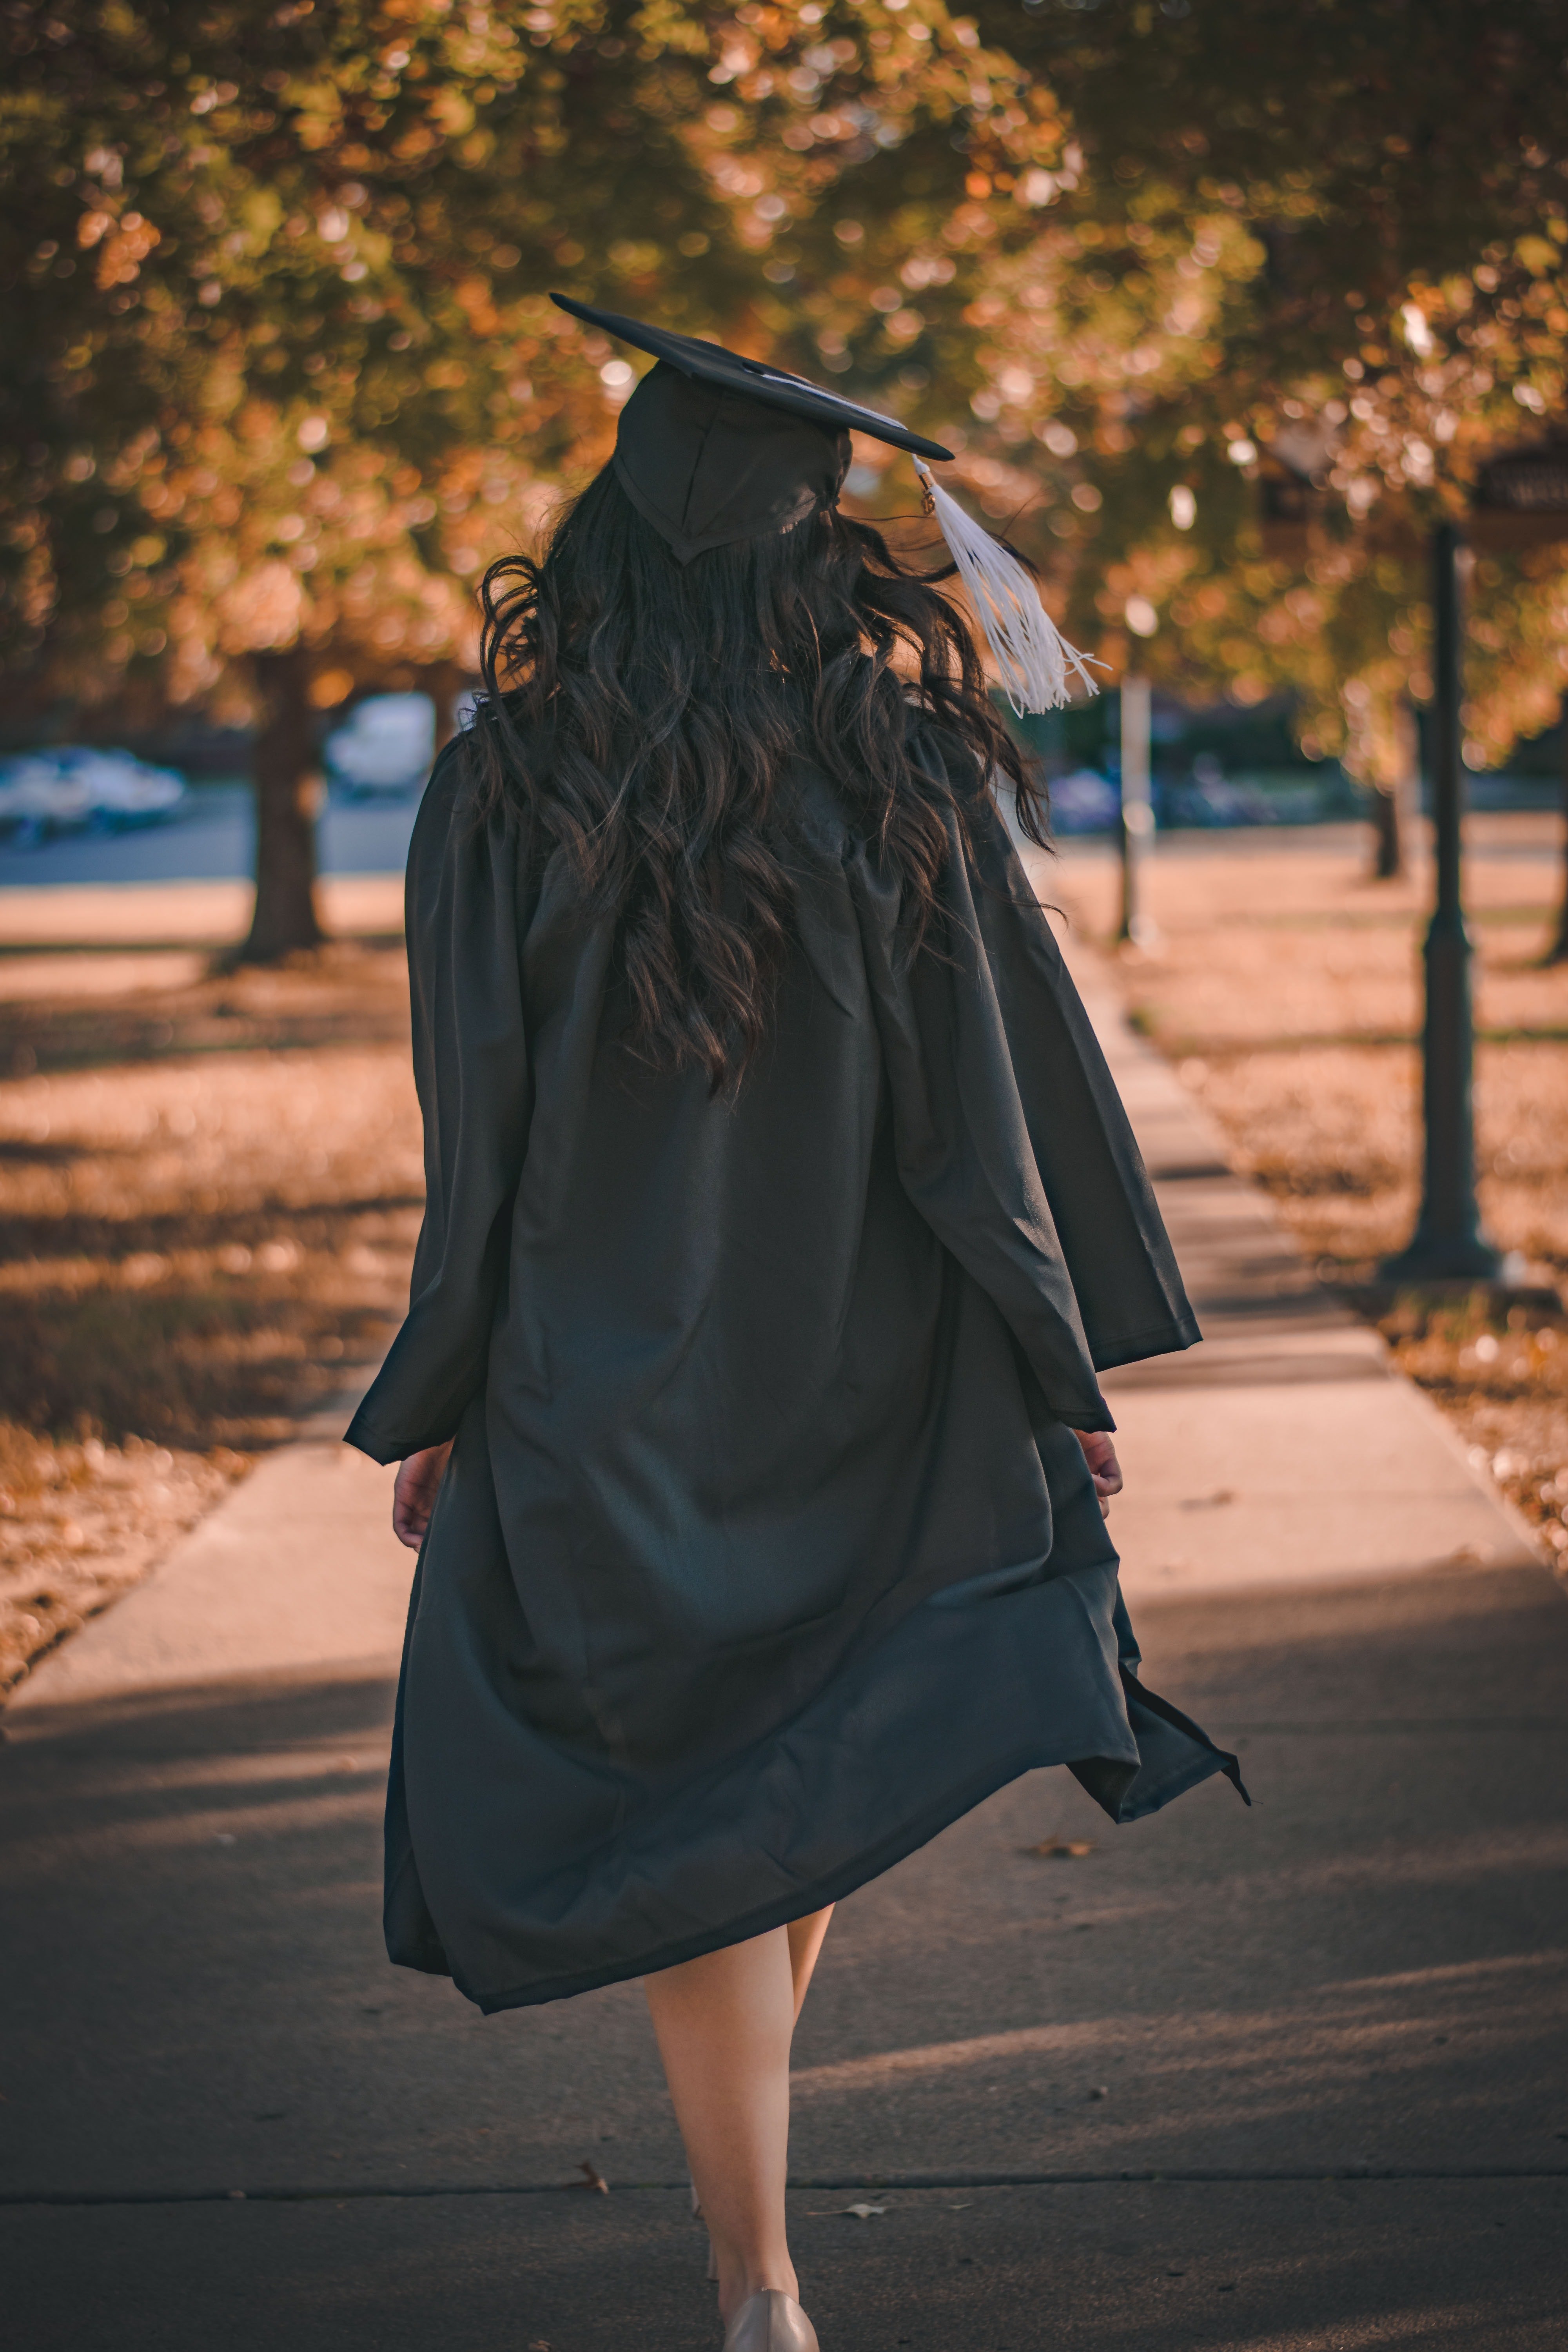 A woman walks away after her graduation ceremony | Source: Pexels